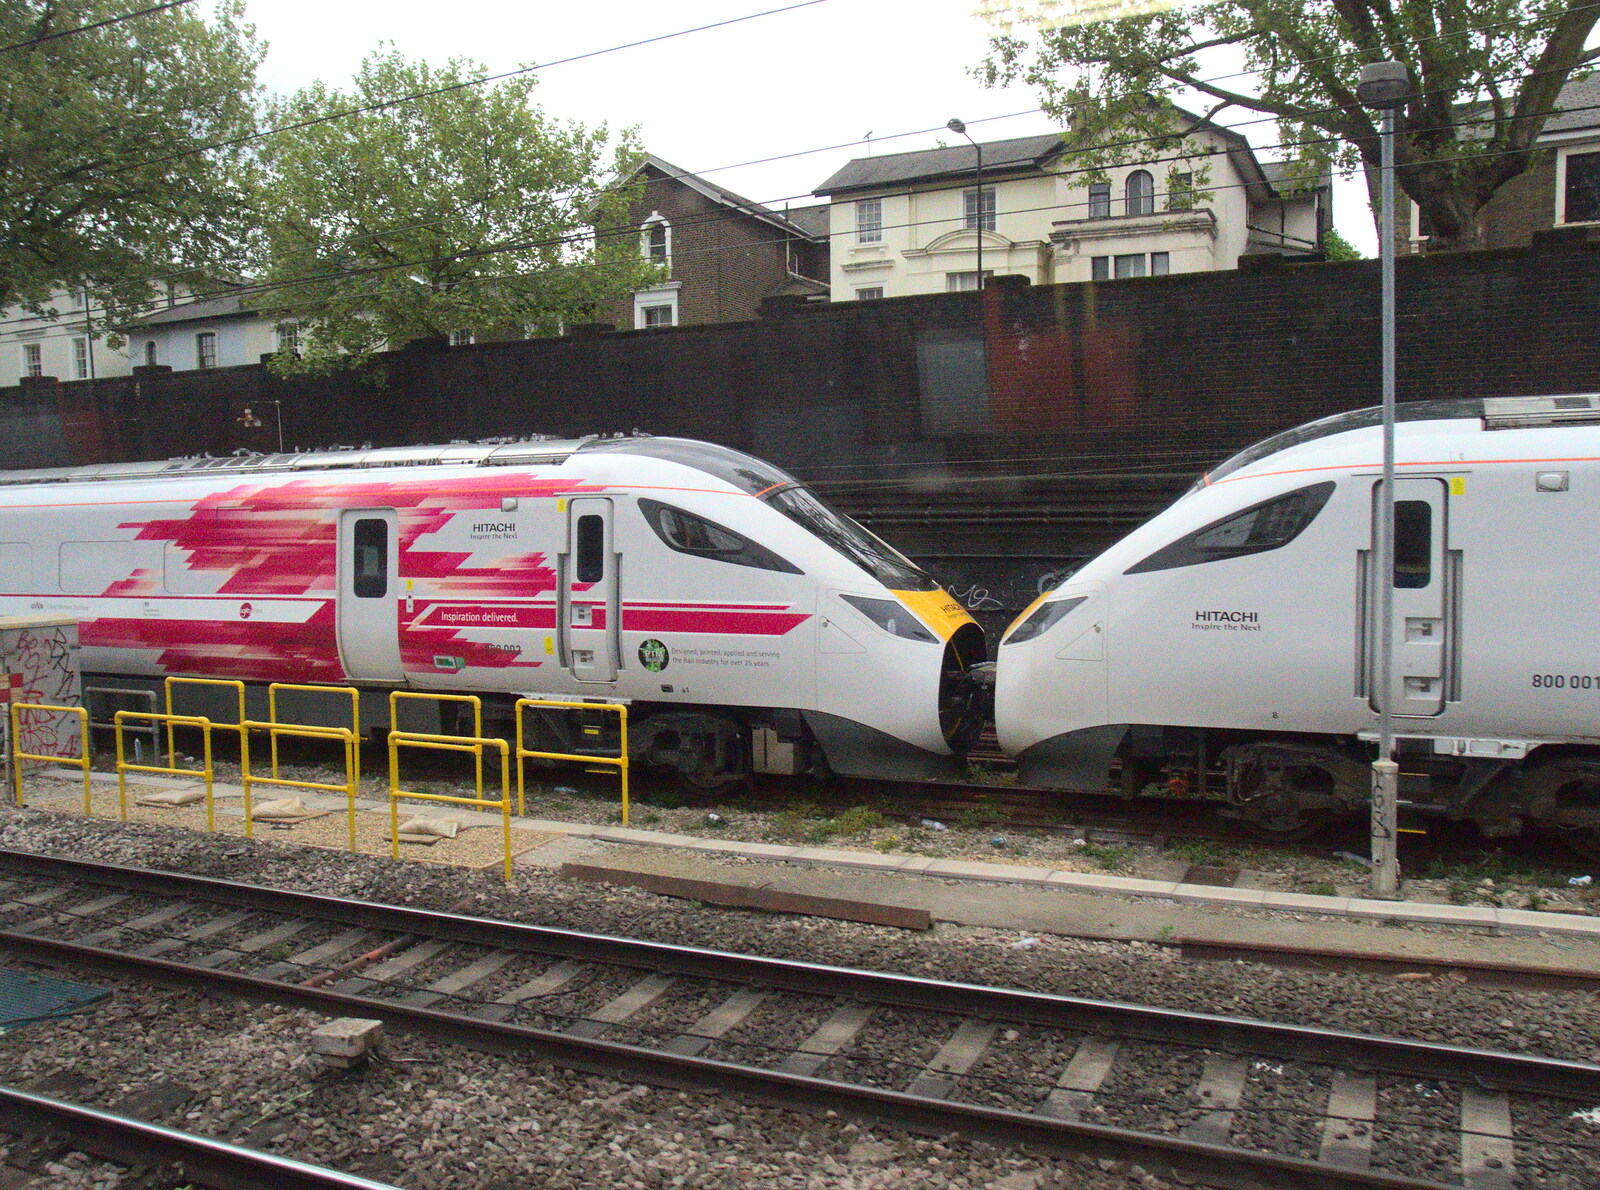 A pair of Hitach Azuma Class 800s, including 001 from The Journey Home, Reykjavik, London and Brantham - 24th April 2017